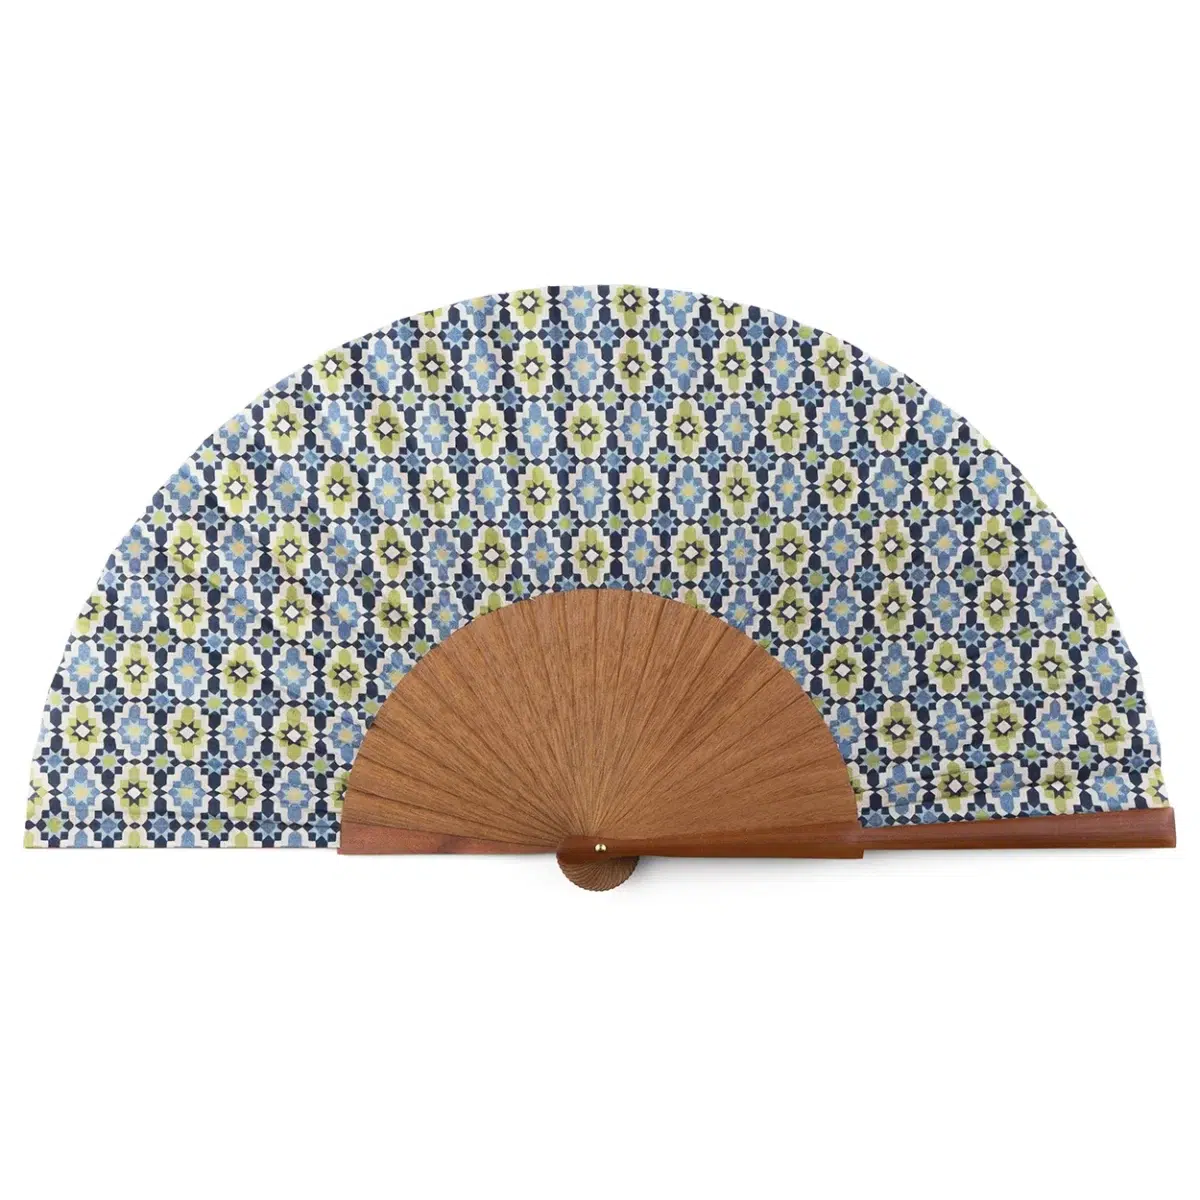 Silk and wood fan inspired by Moroccan mosaics.